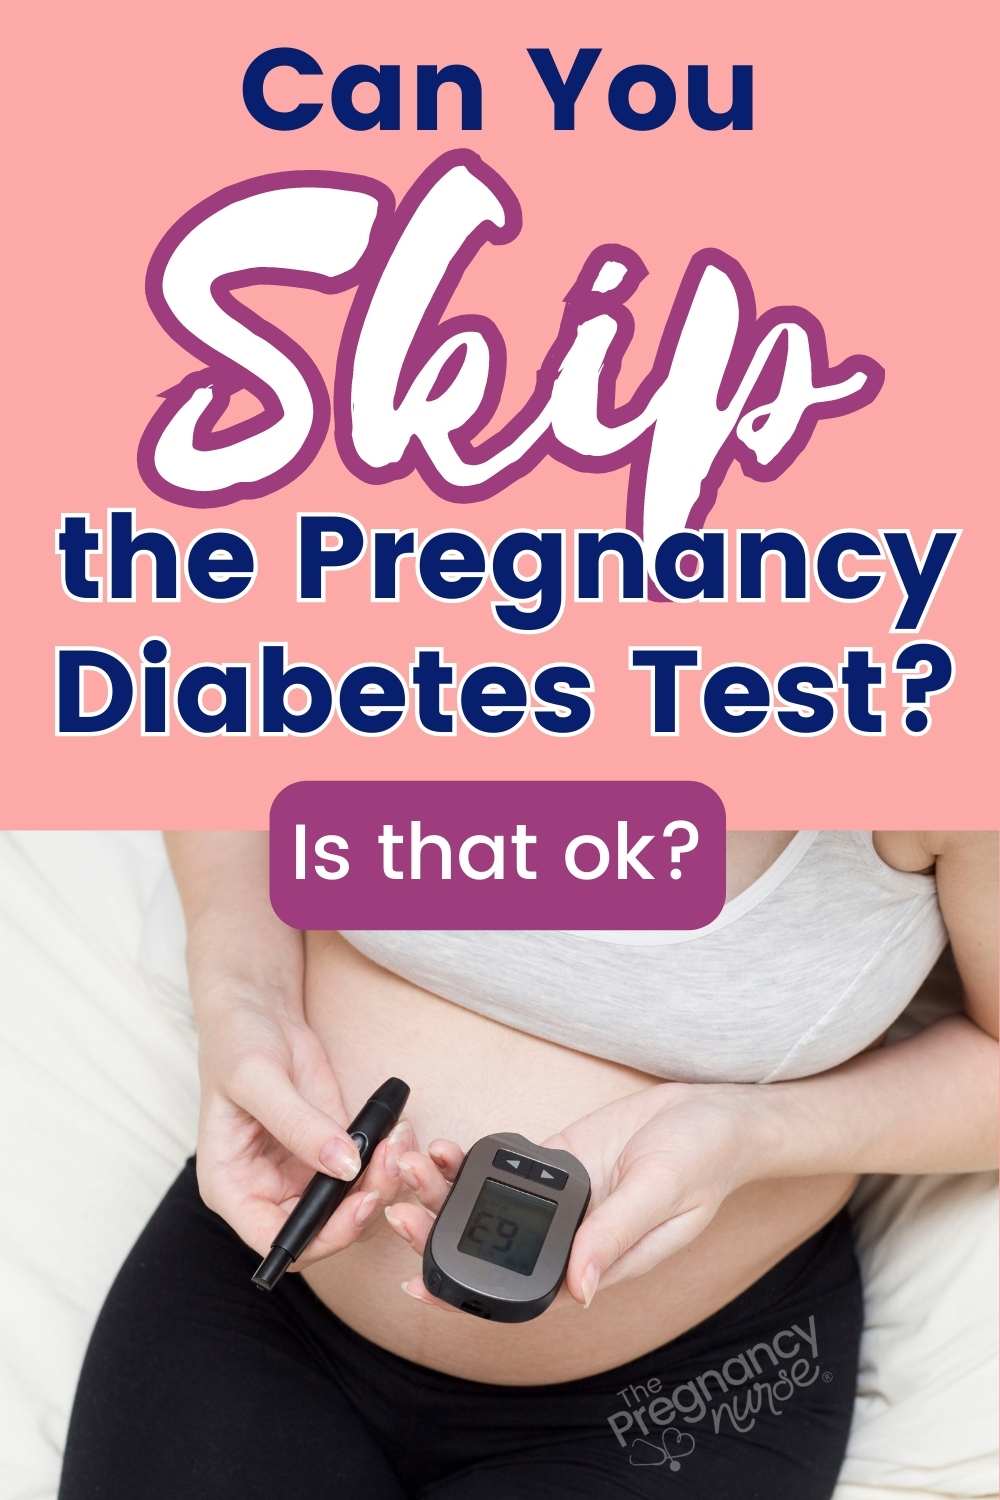 Descend into the medical world and uncover the hidden mysteries behind the Pregnancy Glucose Test. Get enlightened, be informed and join us as we break down the complexities of gestational diabetes.